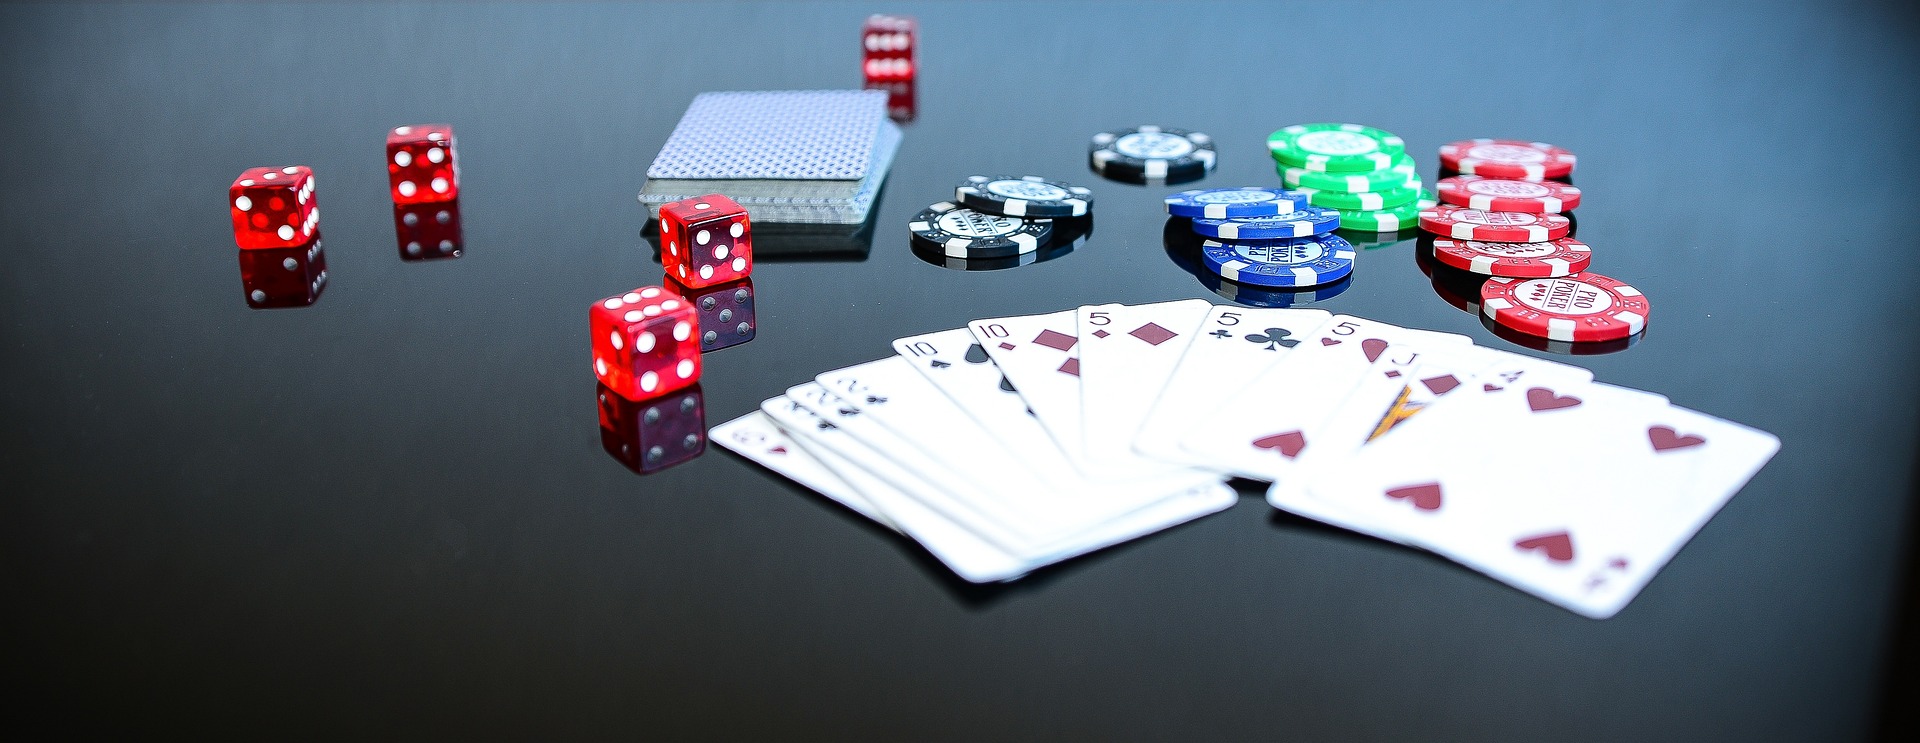 Casino game of poker and dice